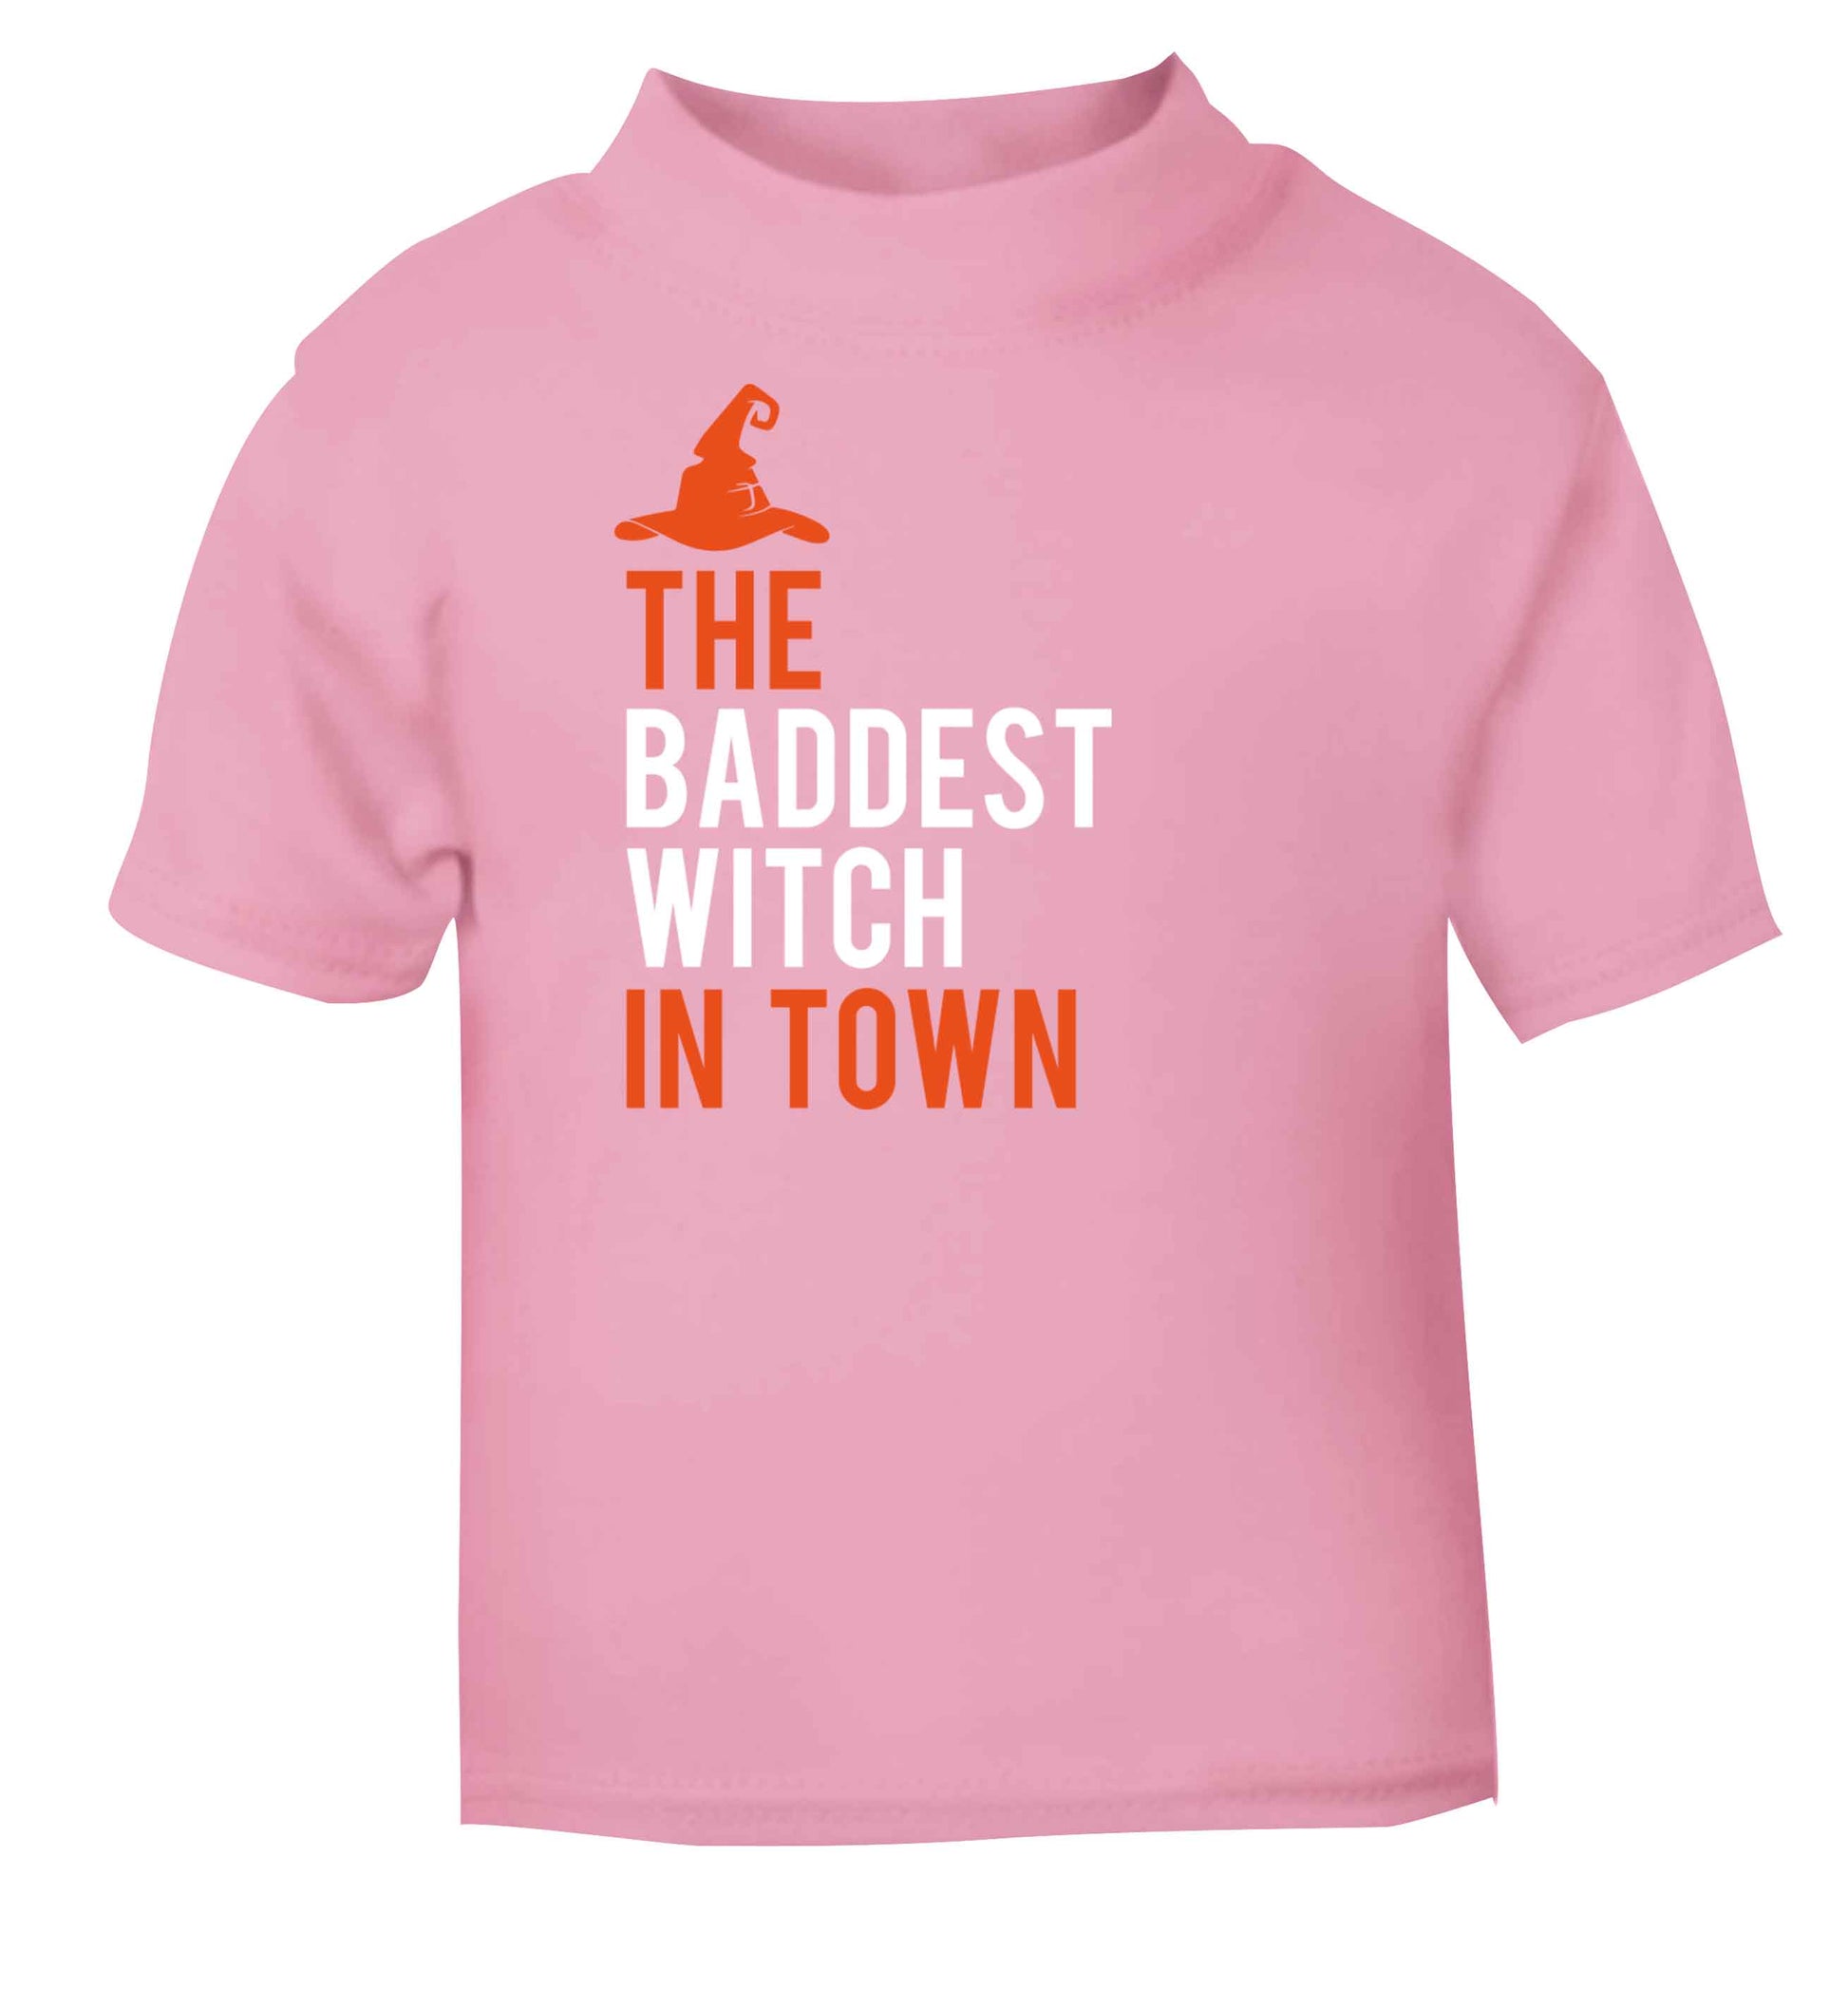 Badest witch in town light pink baby toddler Tshirt 2 Years